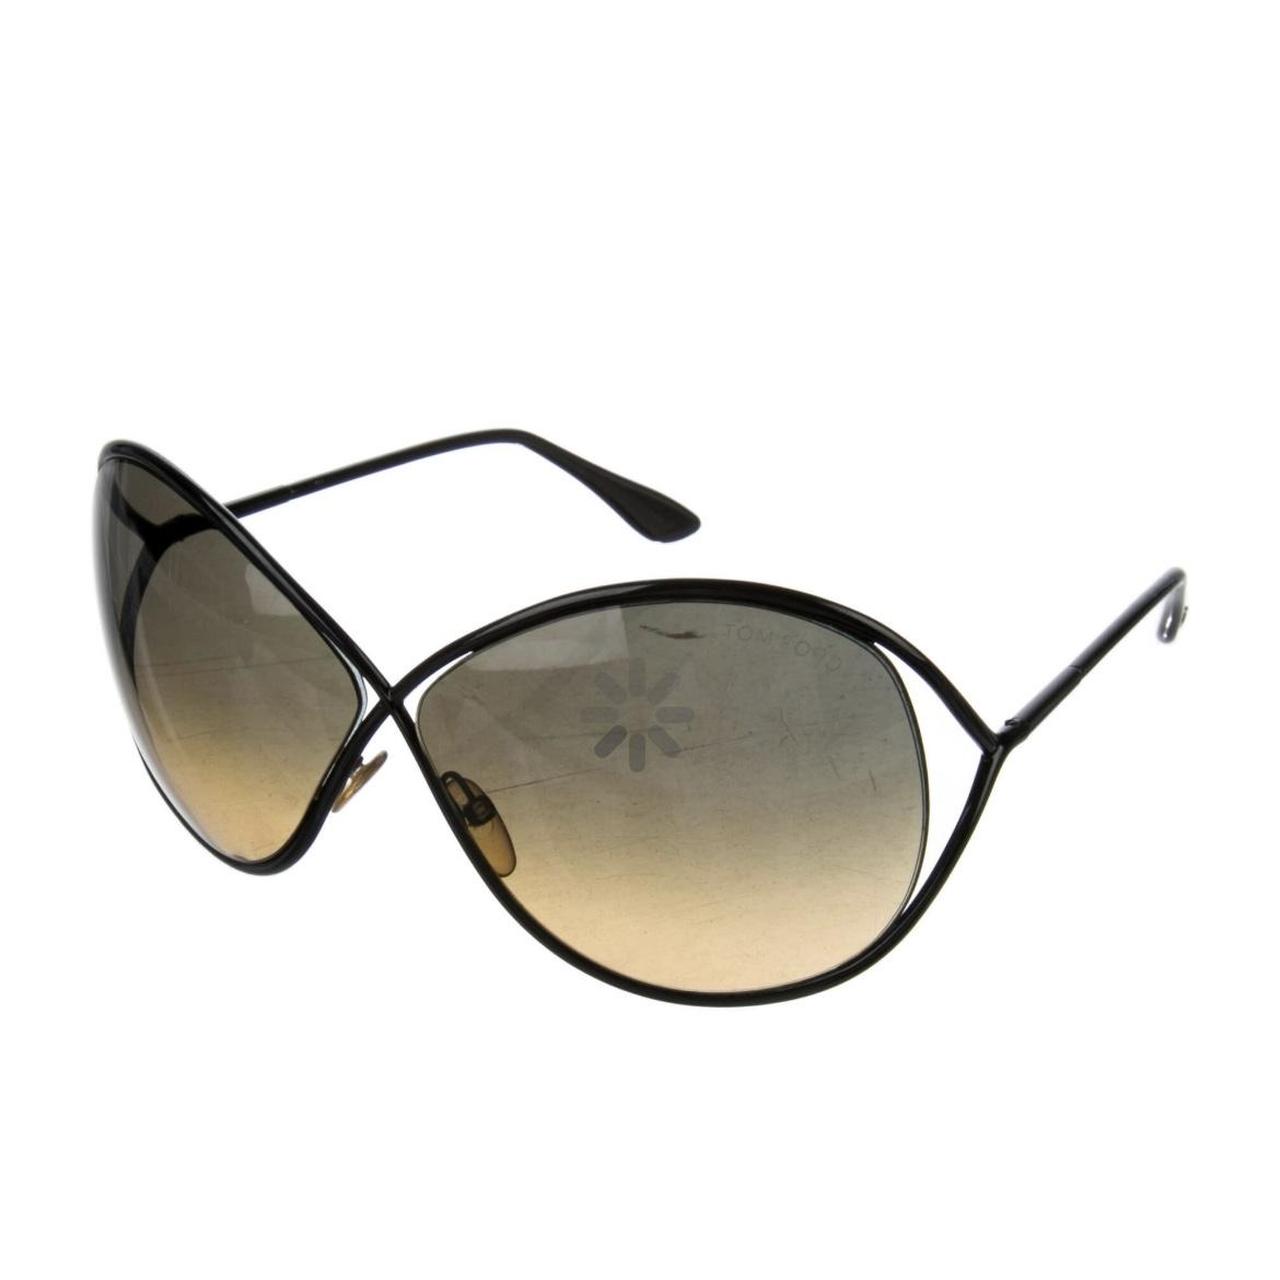 TOM FORD Women's Black and Brown Sunglasses (2)